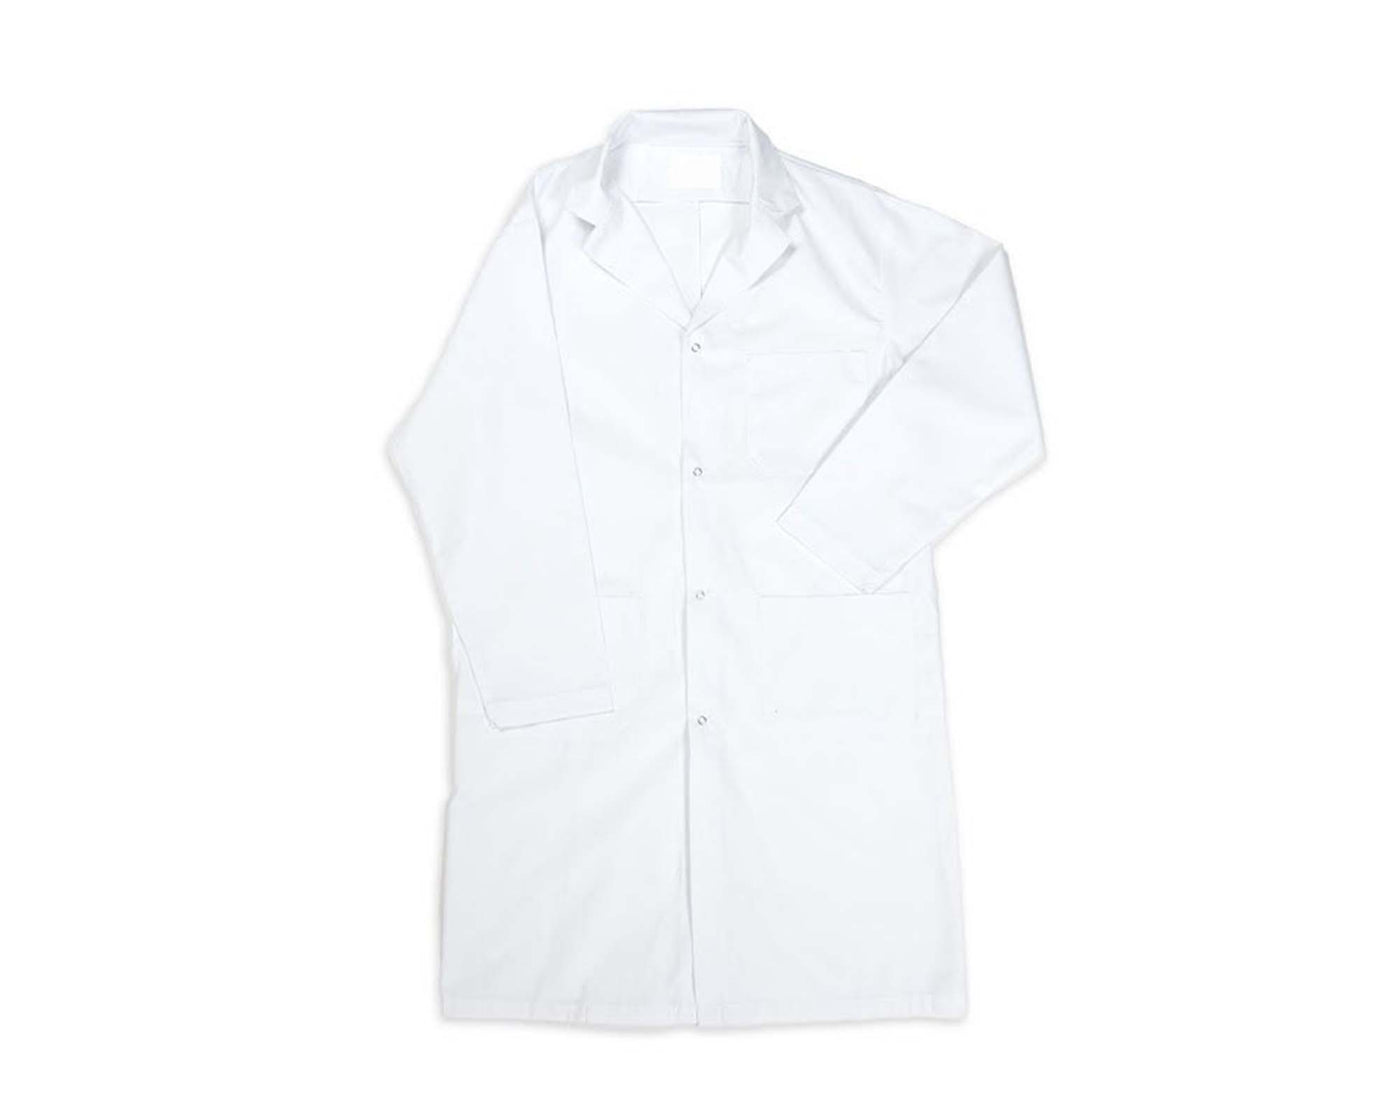 Lab Coat White with Snap button Closure